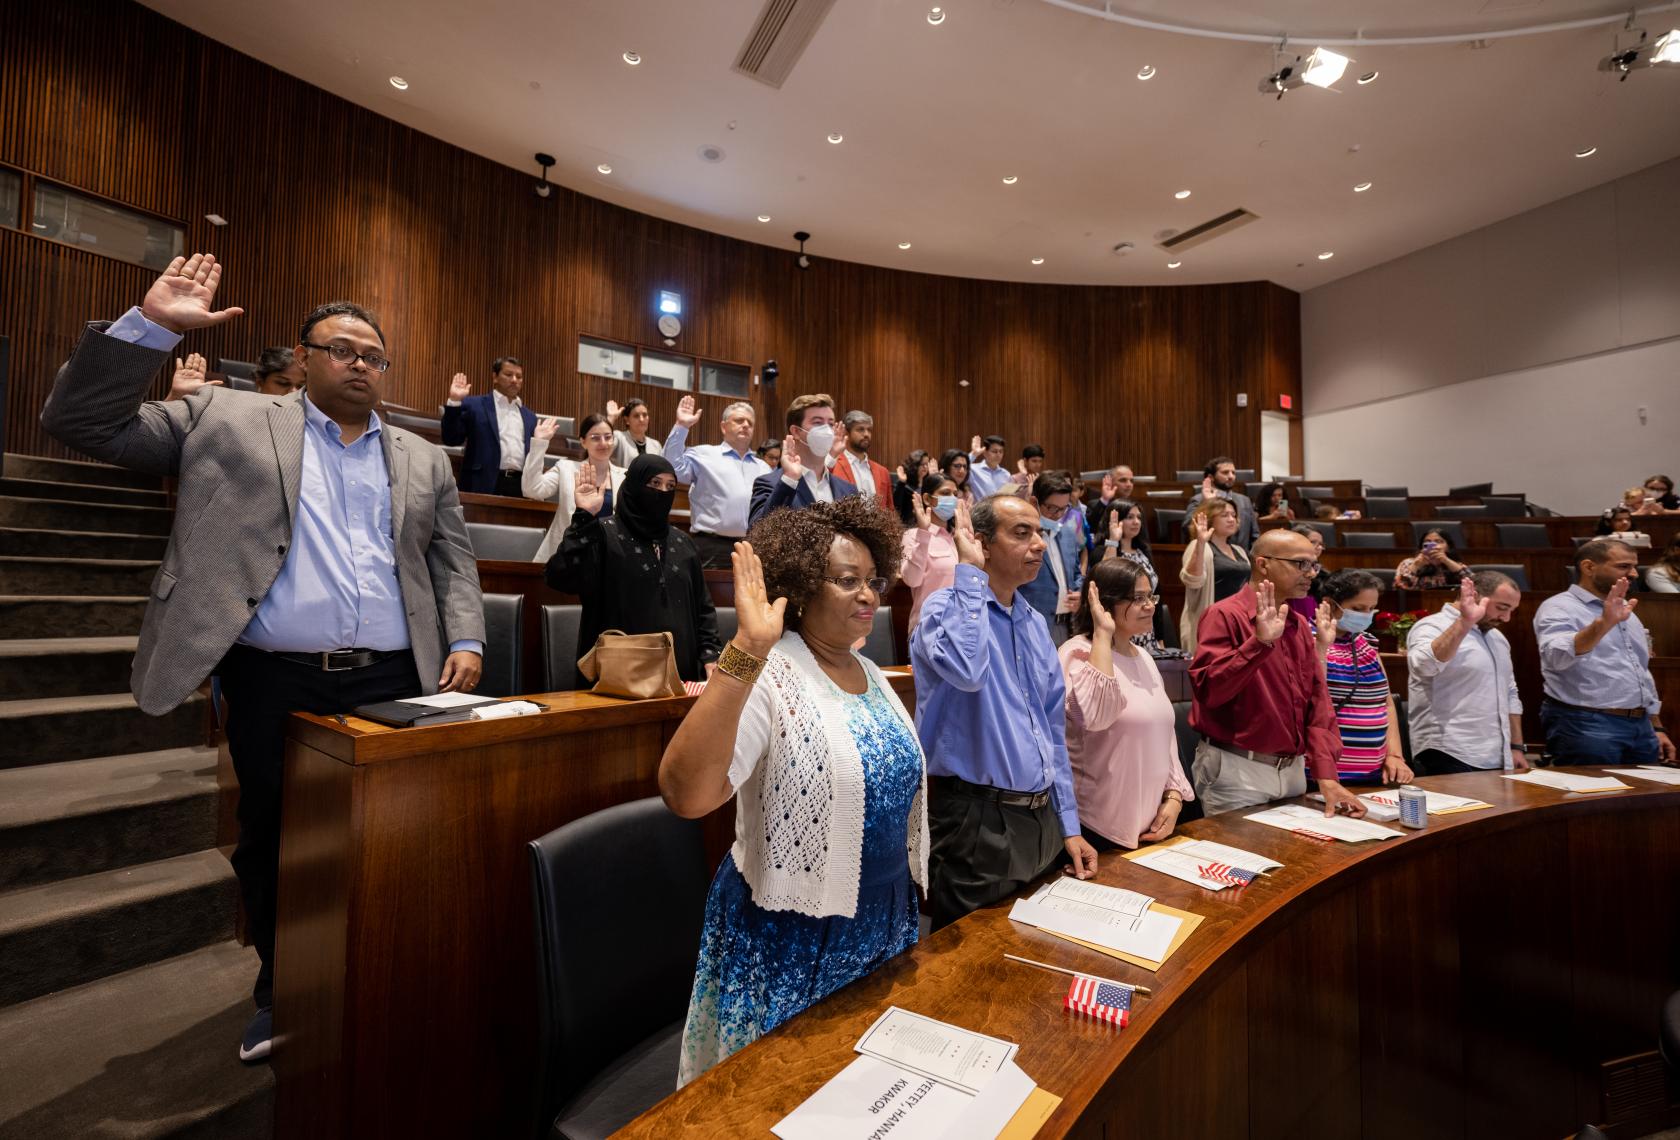 Thirty People Become U.S. Citizens at Naturalization Ceremony. Photo by Sameer Khan (Fotobuddy)